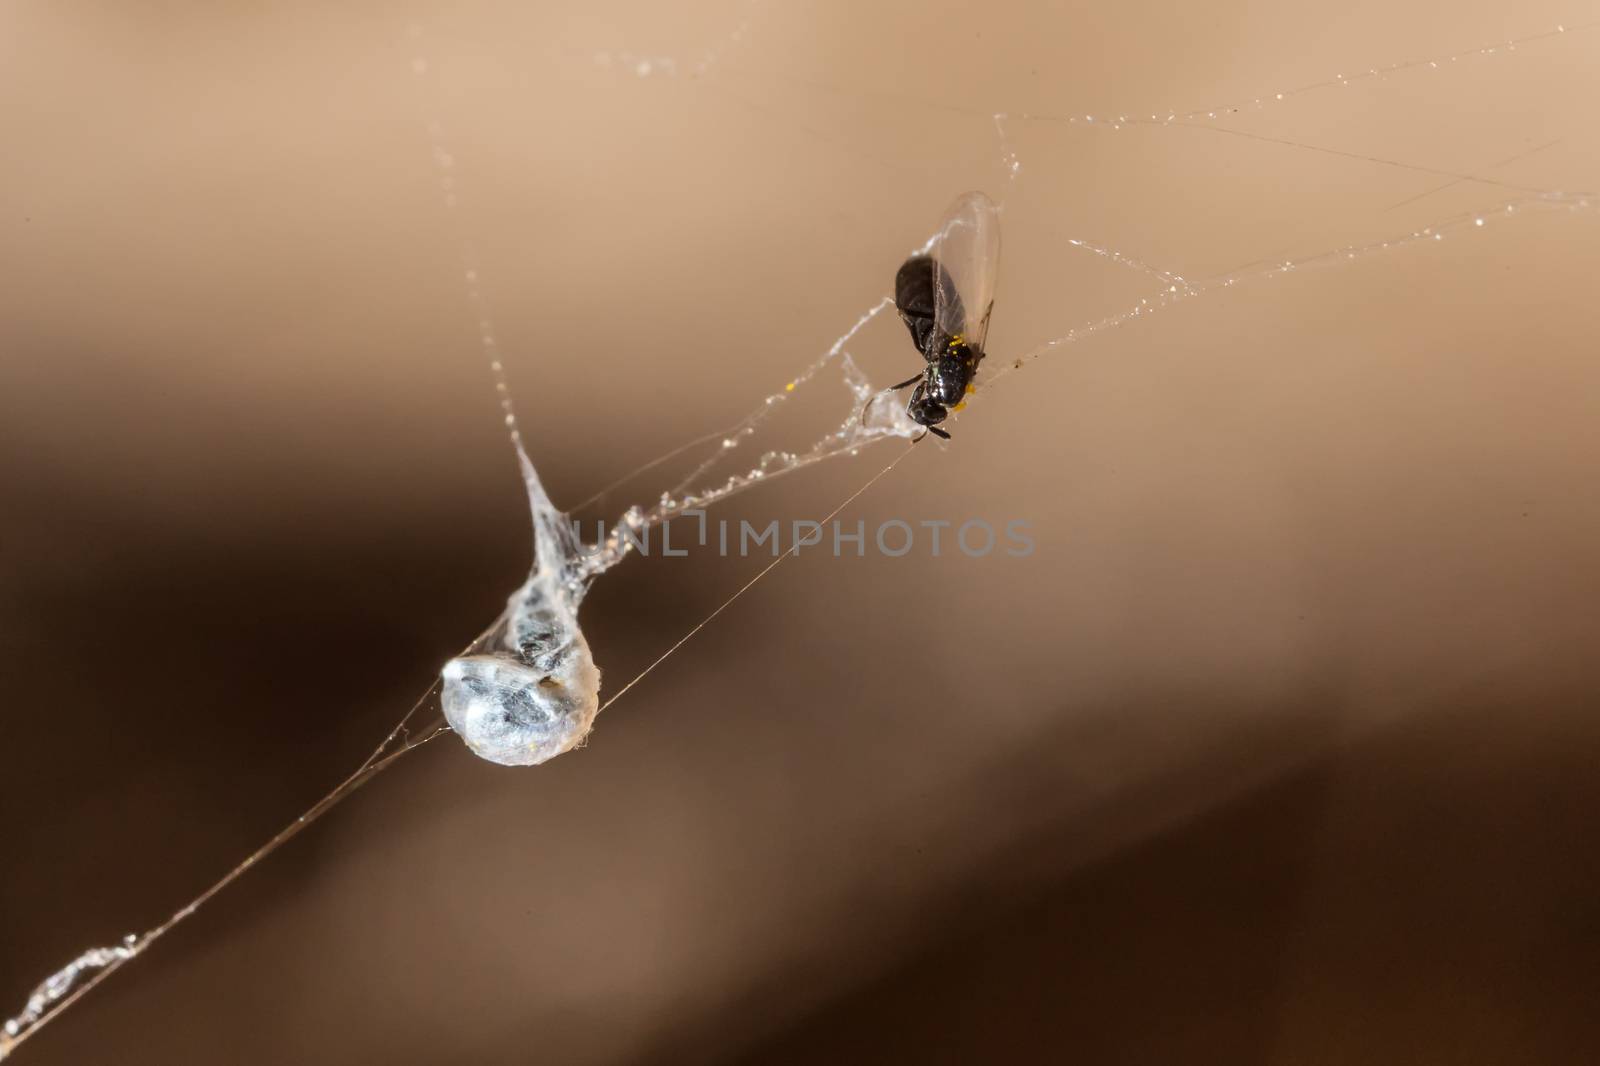 Macro shot showing a cobweb strand with a freshly trapped insect, as well as another all wrapped up in silk.